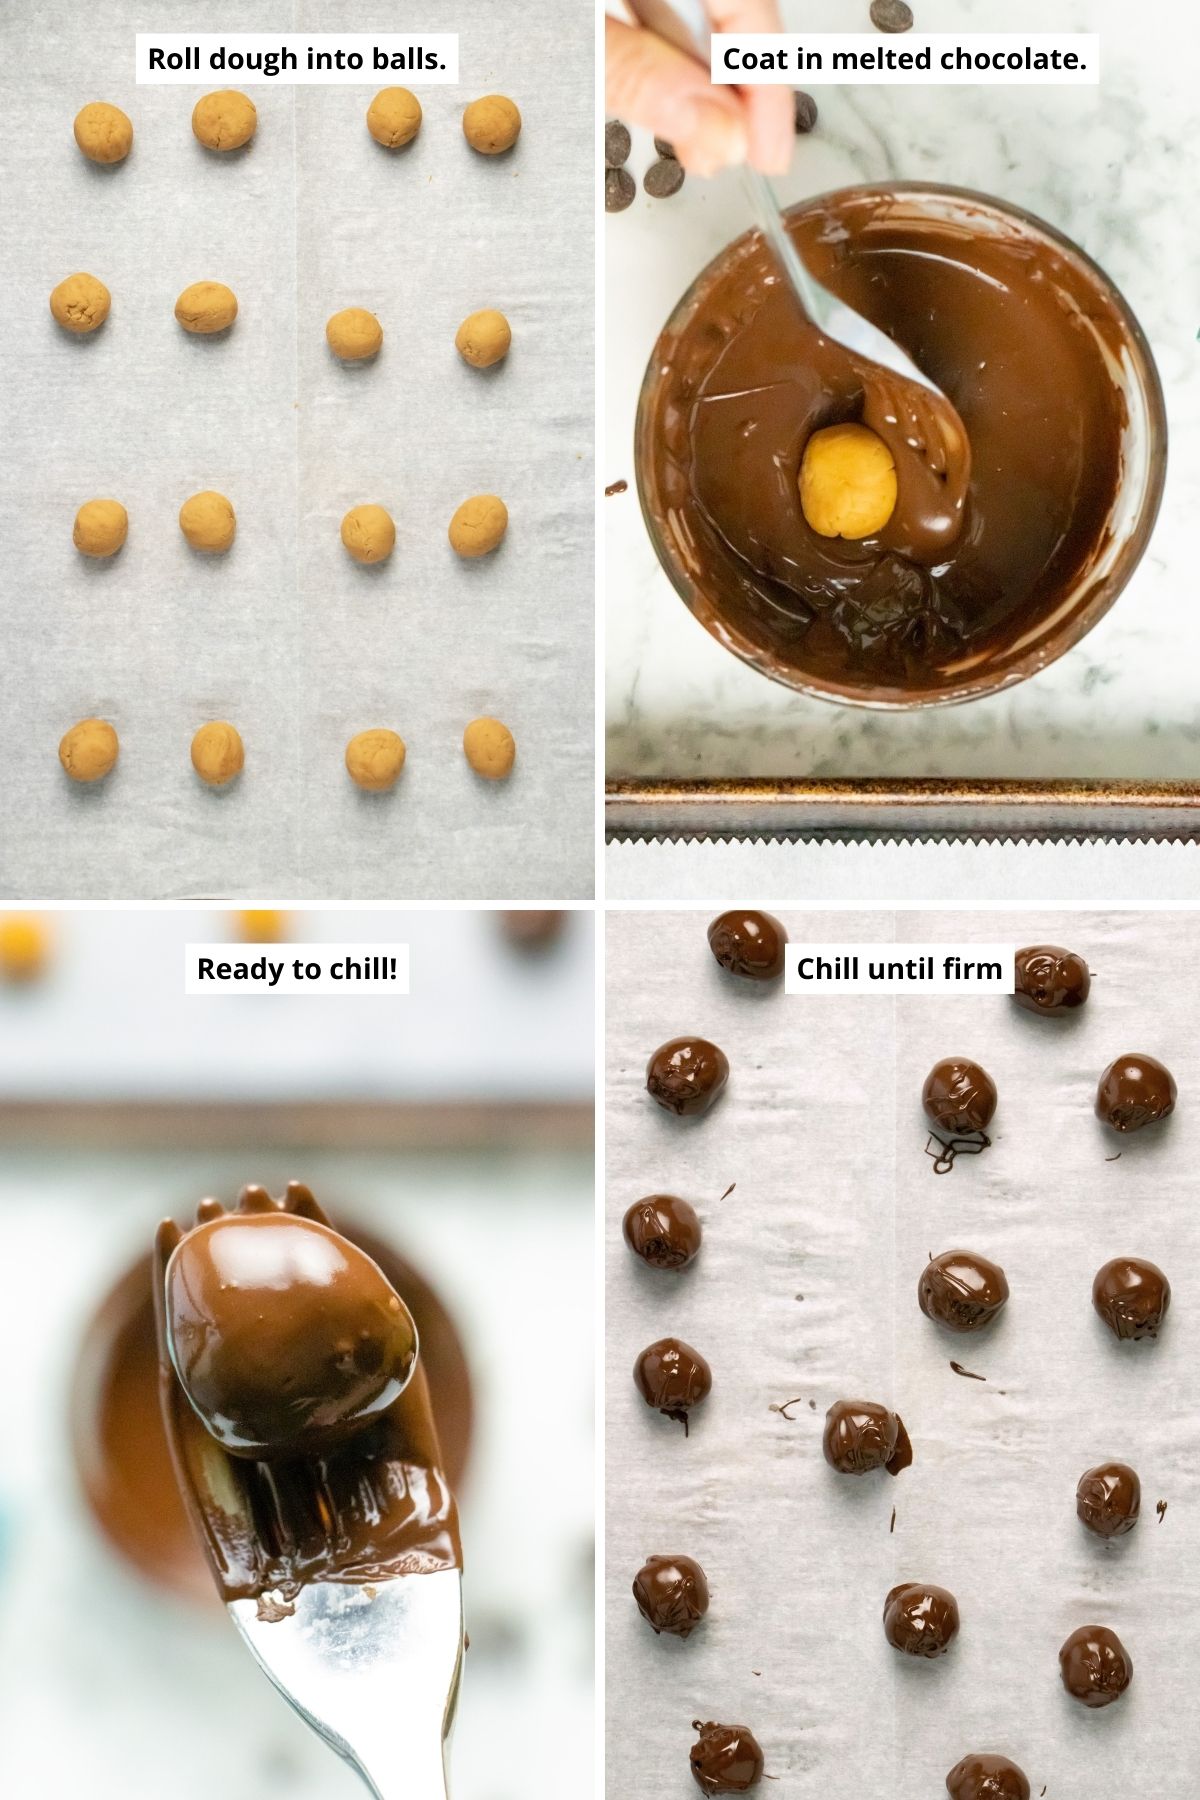 image collage showing the peanut butter balls before covering in chocolate, in a bowl of melted chocolate, a close-up of one chocolate-coated peanut butter ball, and then all of them on a baking sheet, ready to freeze